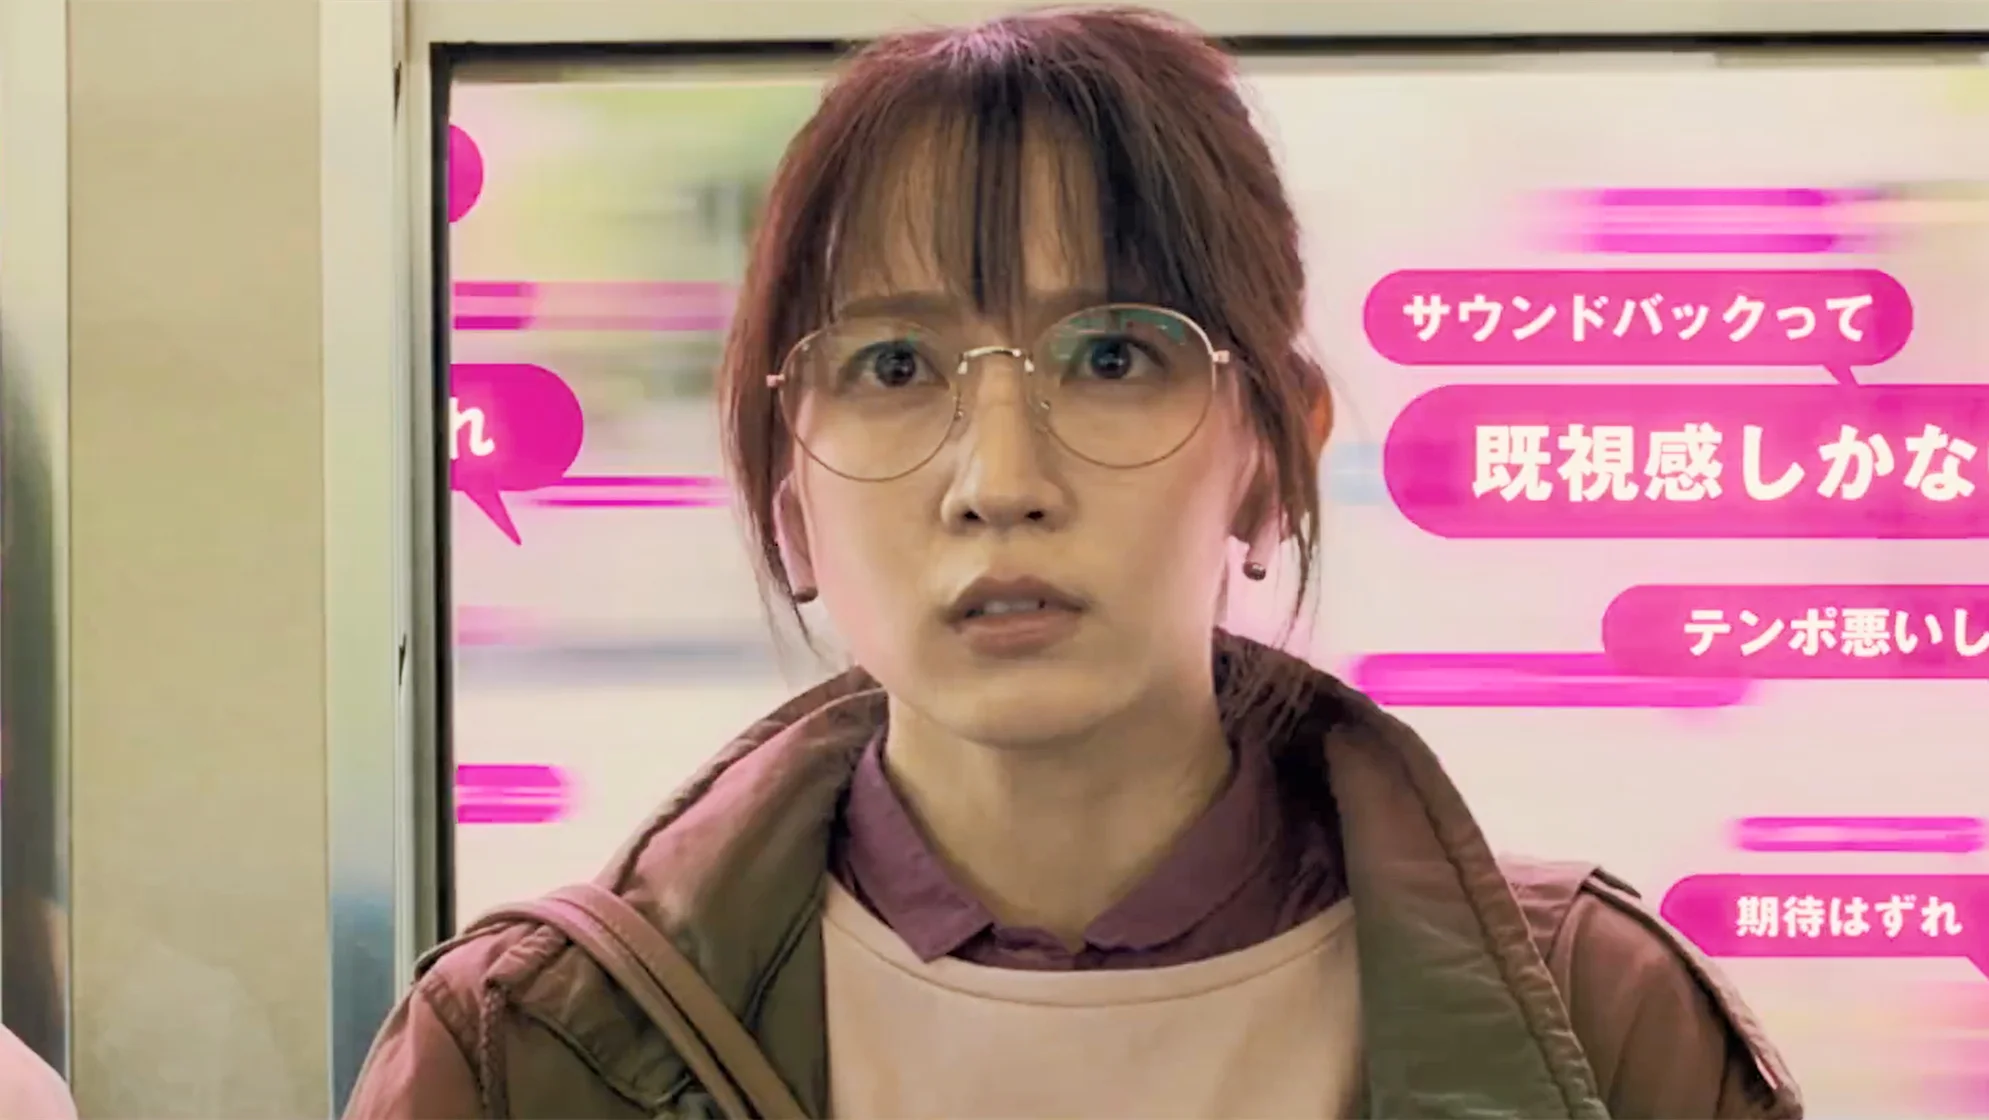 riho-yoshioka-starring-released-a-new-trailer-it-will-be-released-in-japan-on-may-20-1